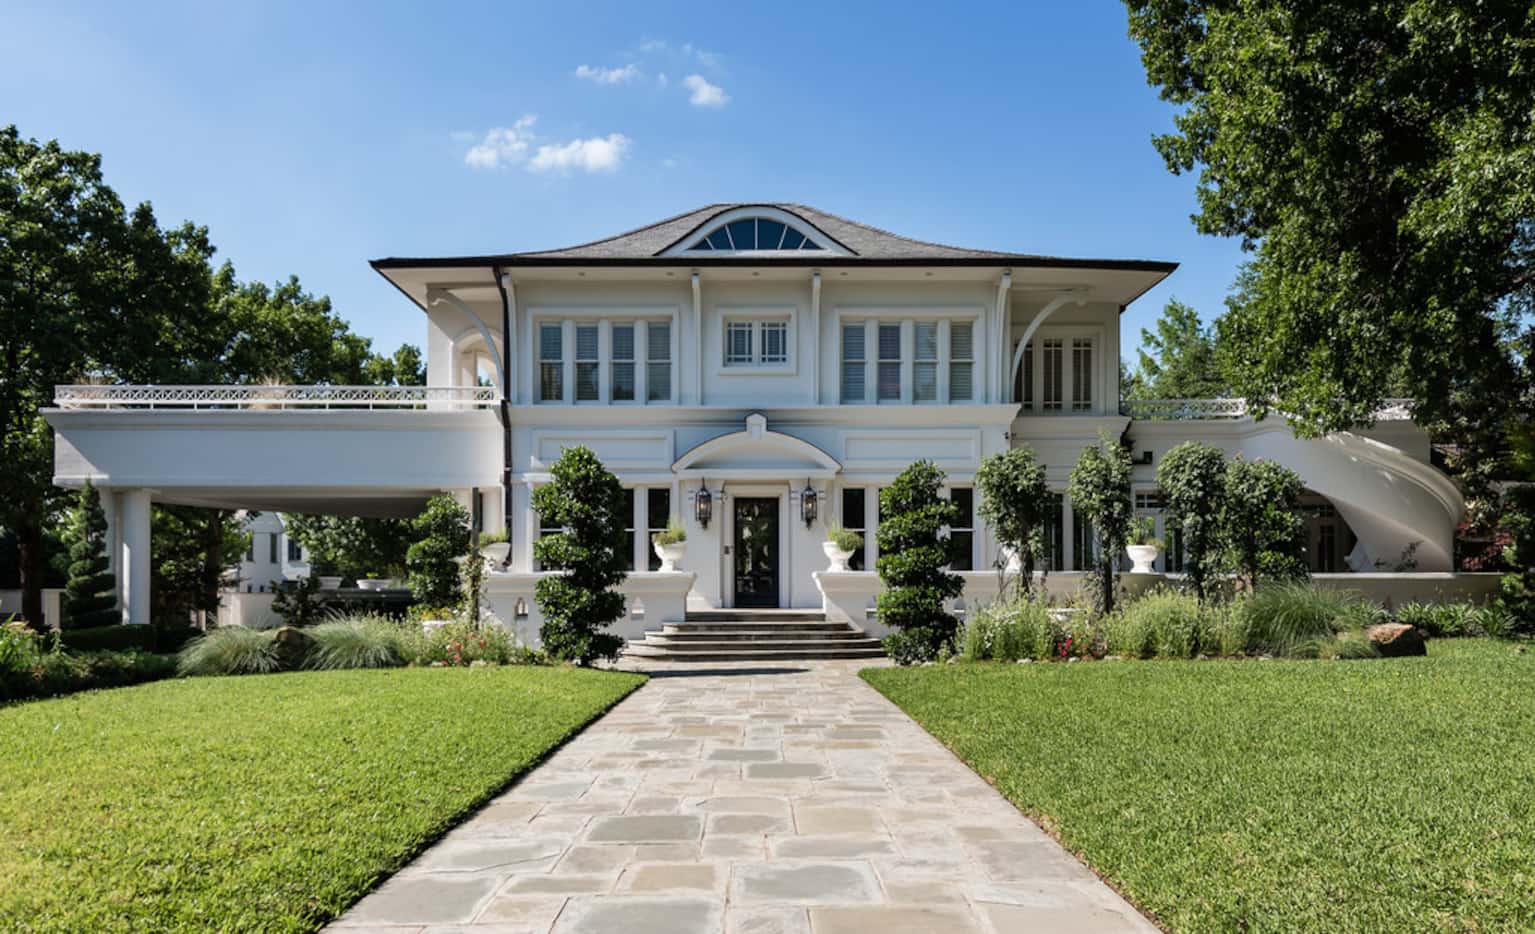 A $12.5 million Highland Park estate owned by a tax attorney recently visted by the feds is...